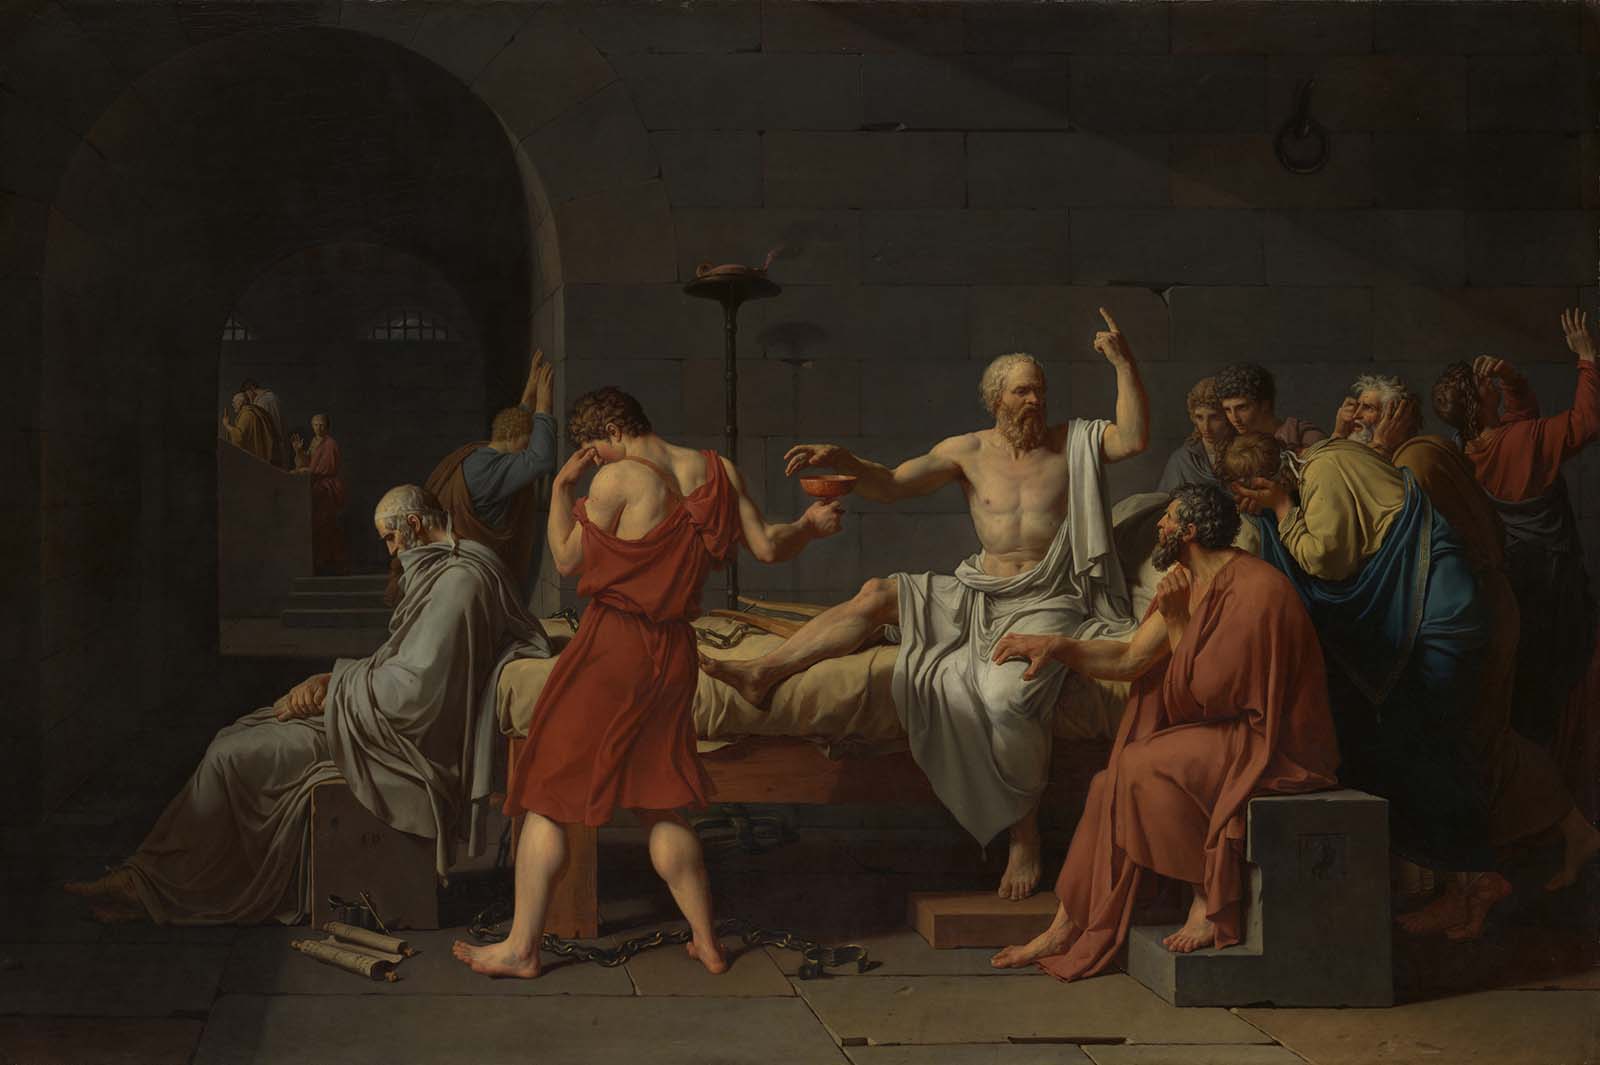 Painting of Socrates sitting on a bed, taking a hemlock from a man, surrounded by his followers who are grieving.